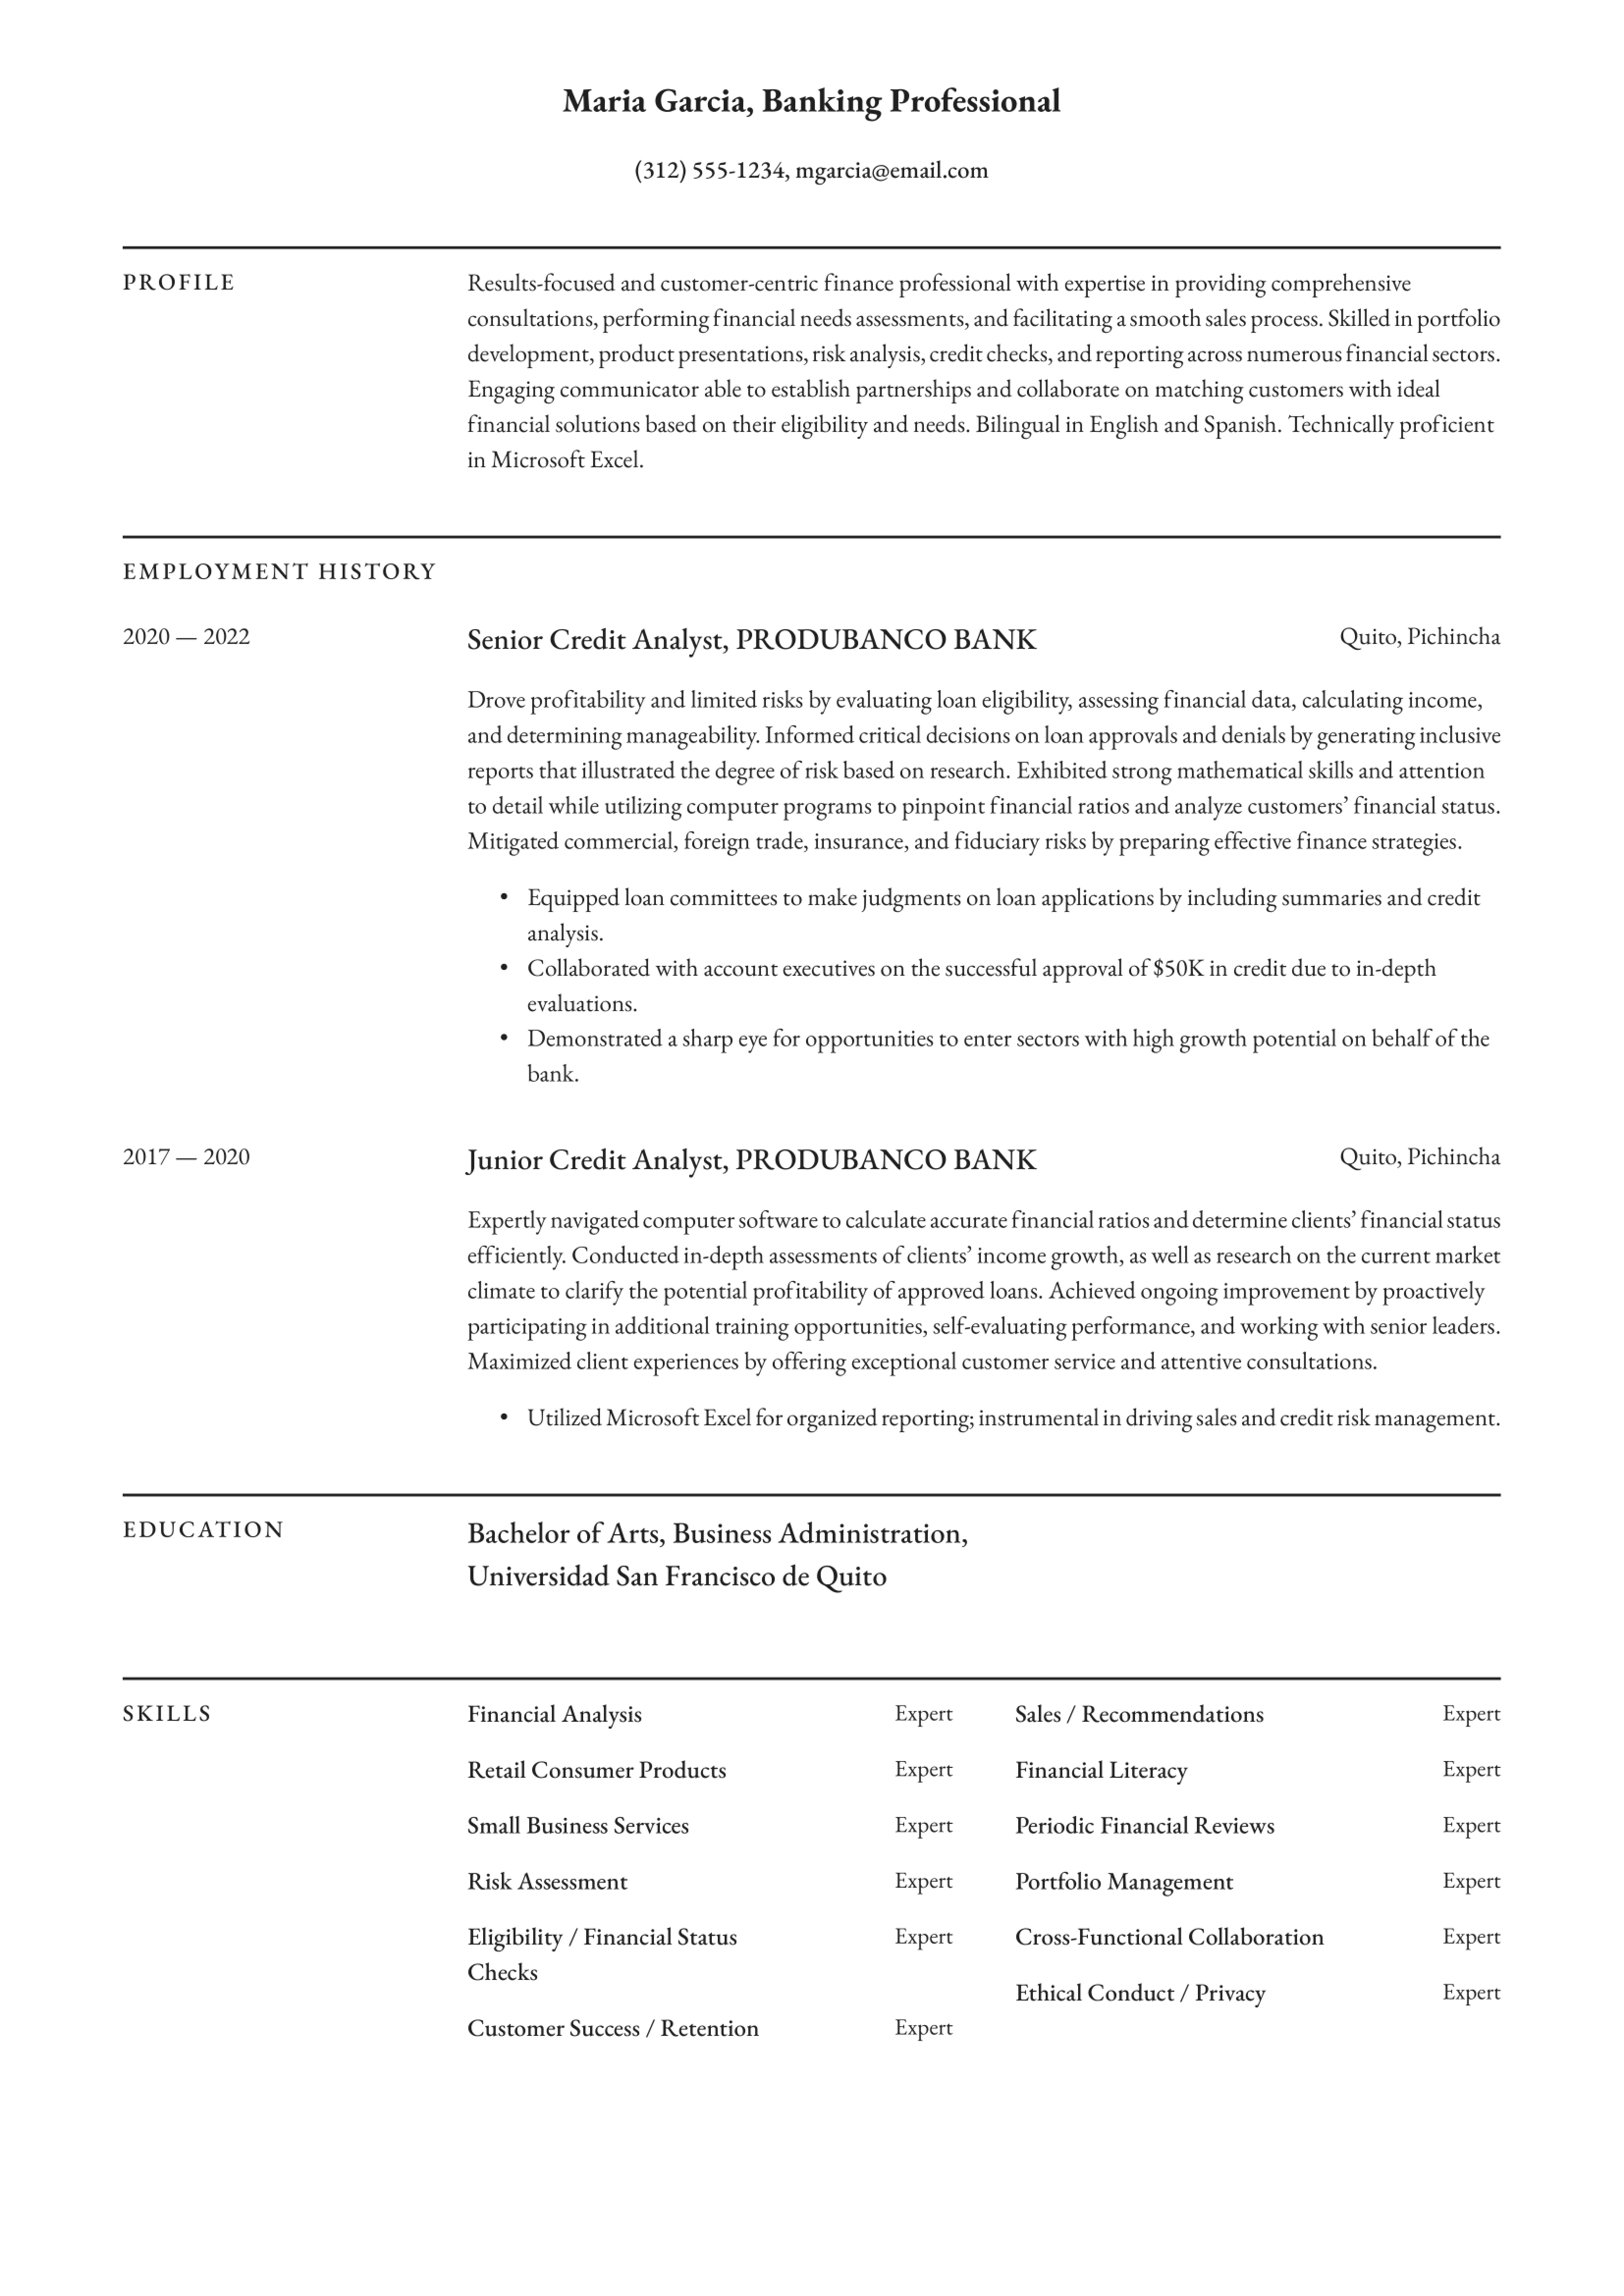 banking-professional-resume-example.png